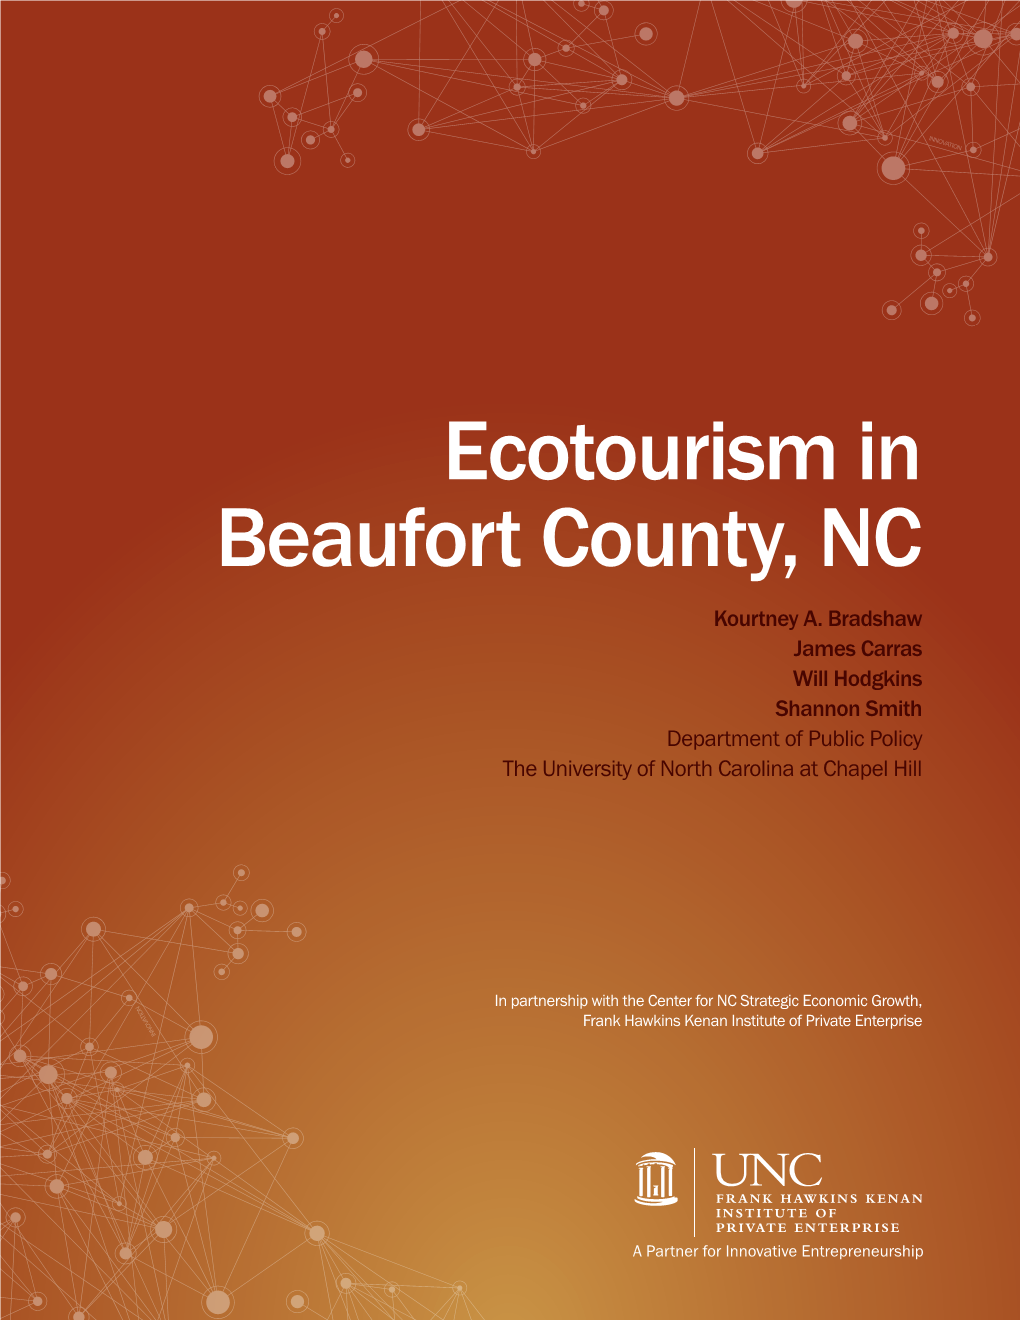 Ecotourism Proposal for Beaufort